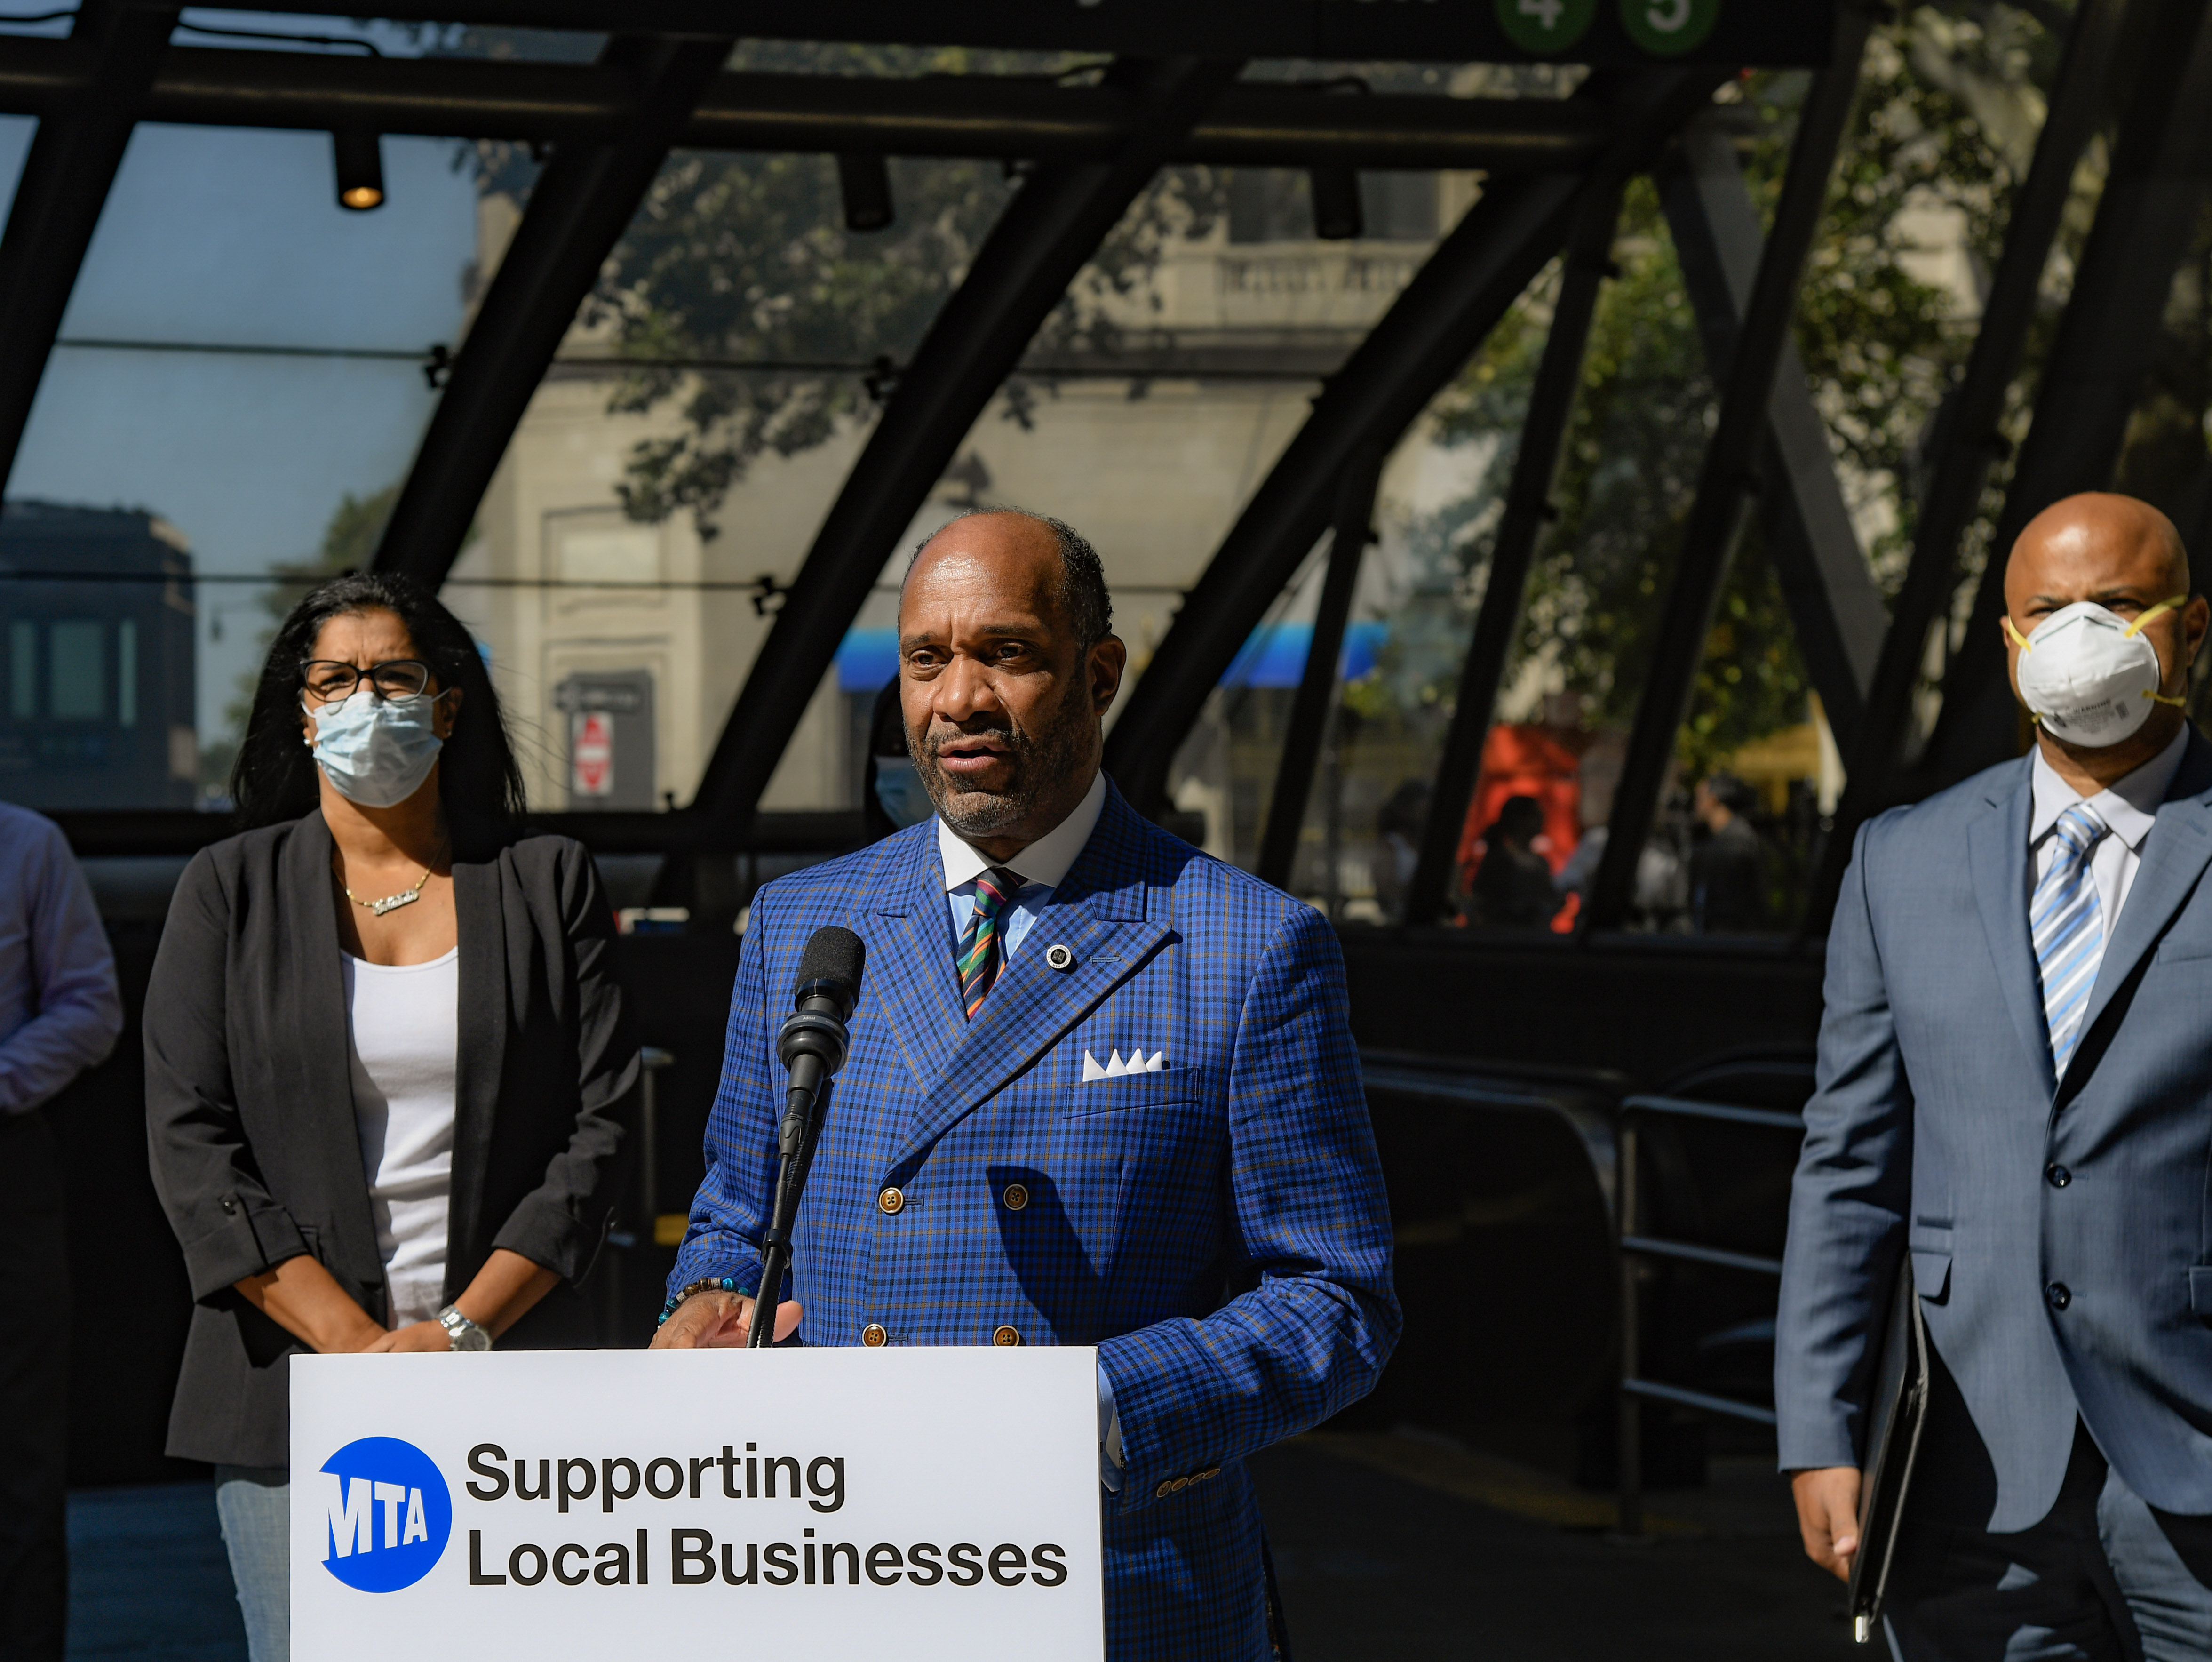 ICYMI: Governor Hochul Announces MTA Small Business Mentoring Program Surpasses $500 Million in Awards to Minority-Owned, Women-Owned Businesses